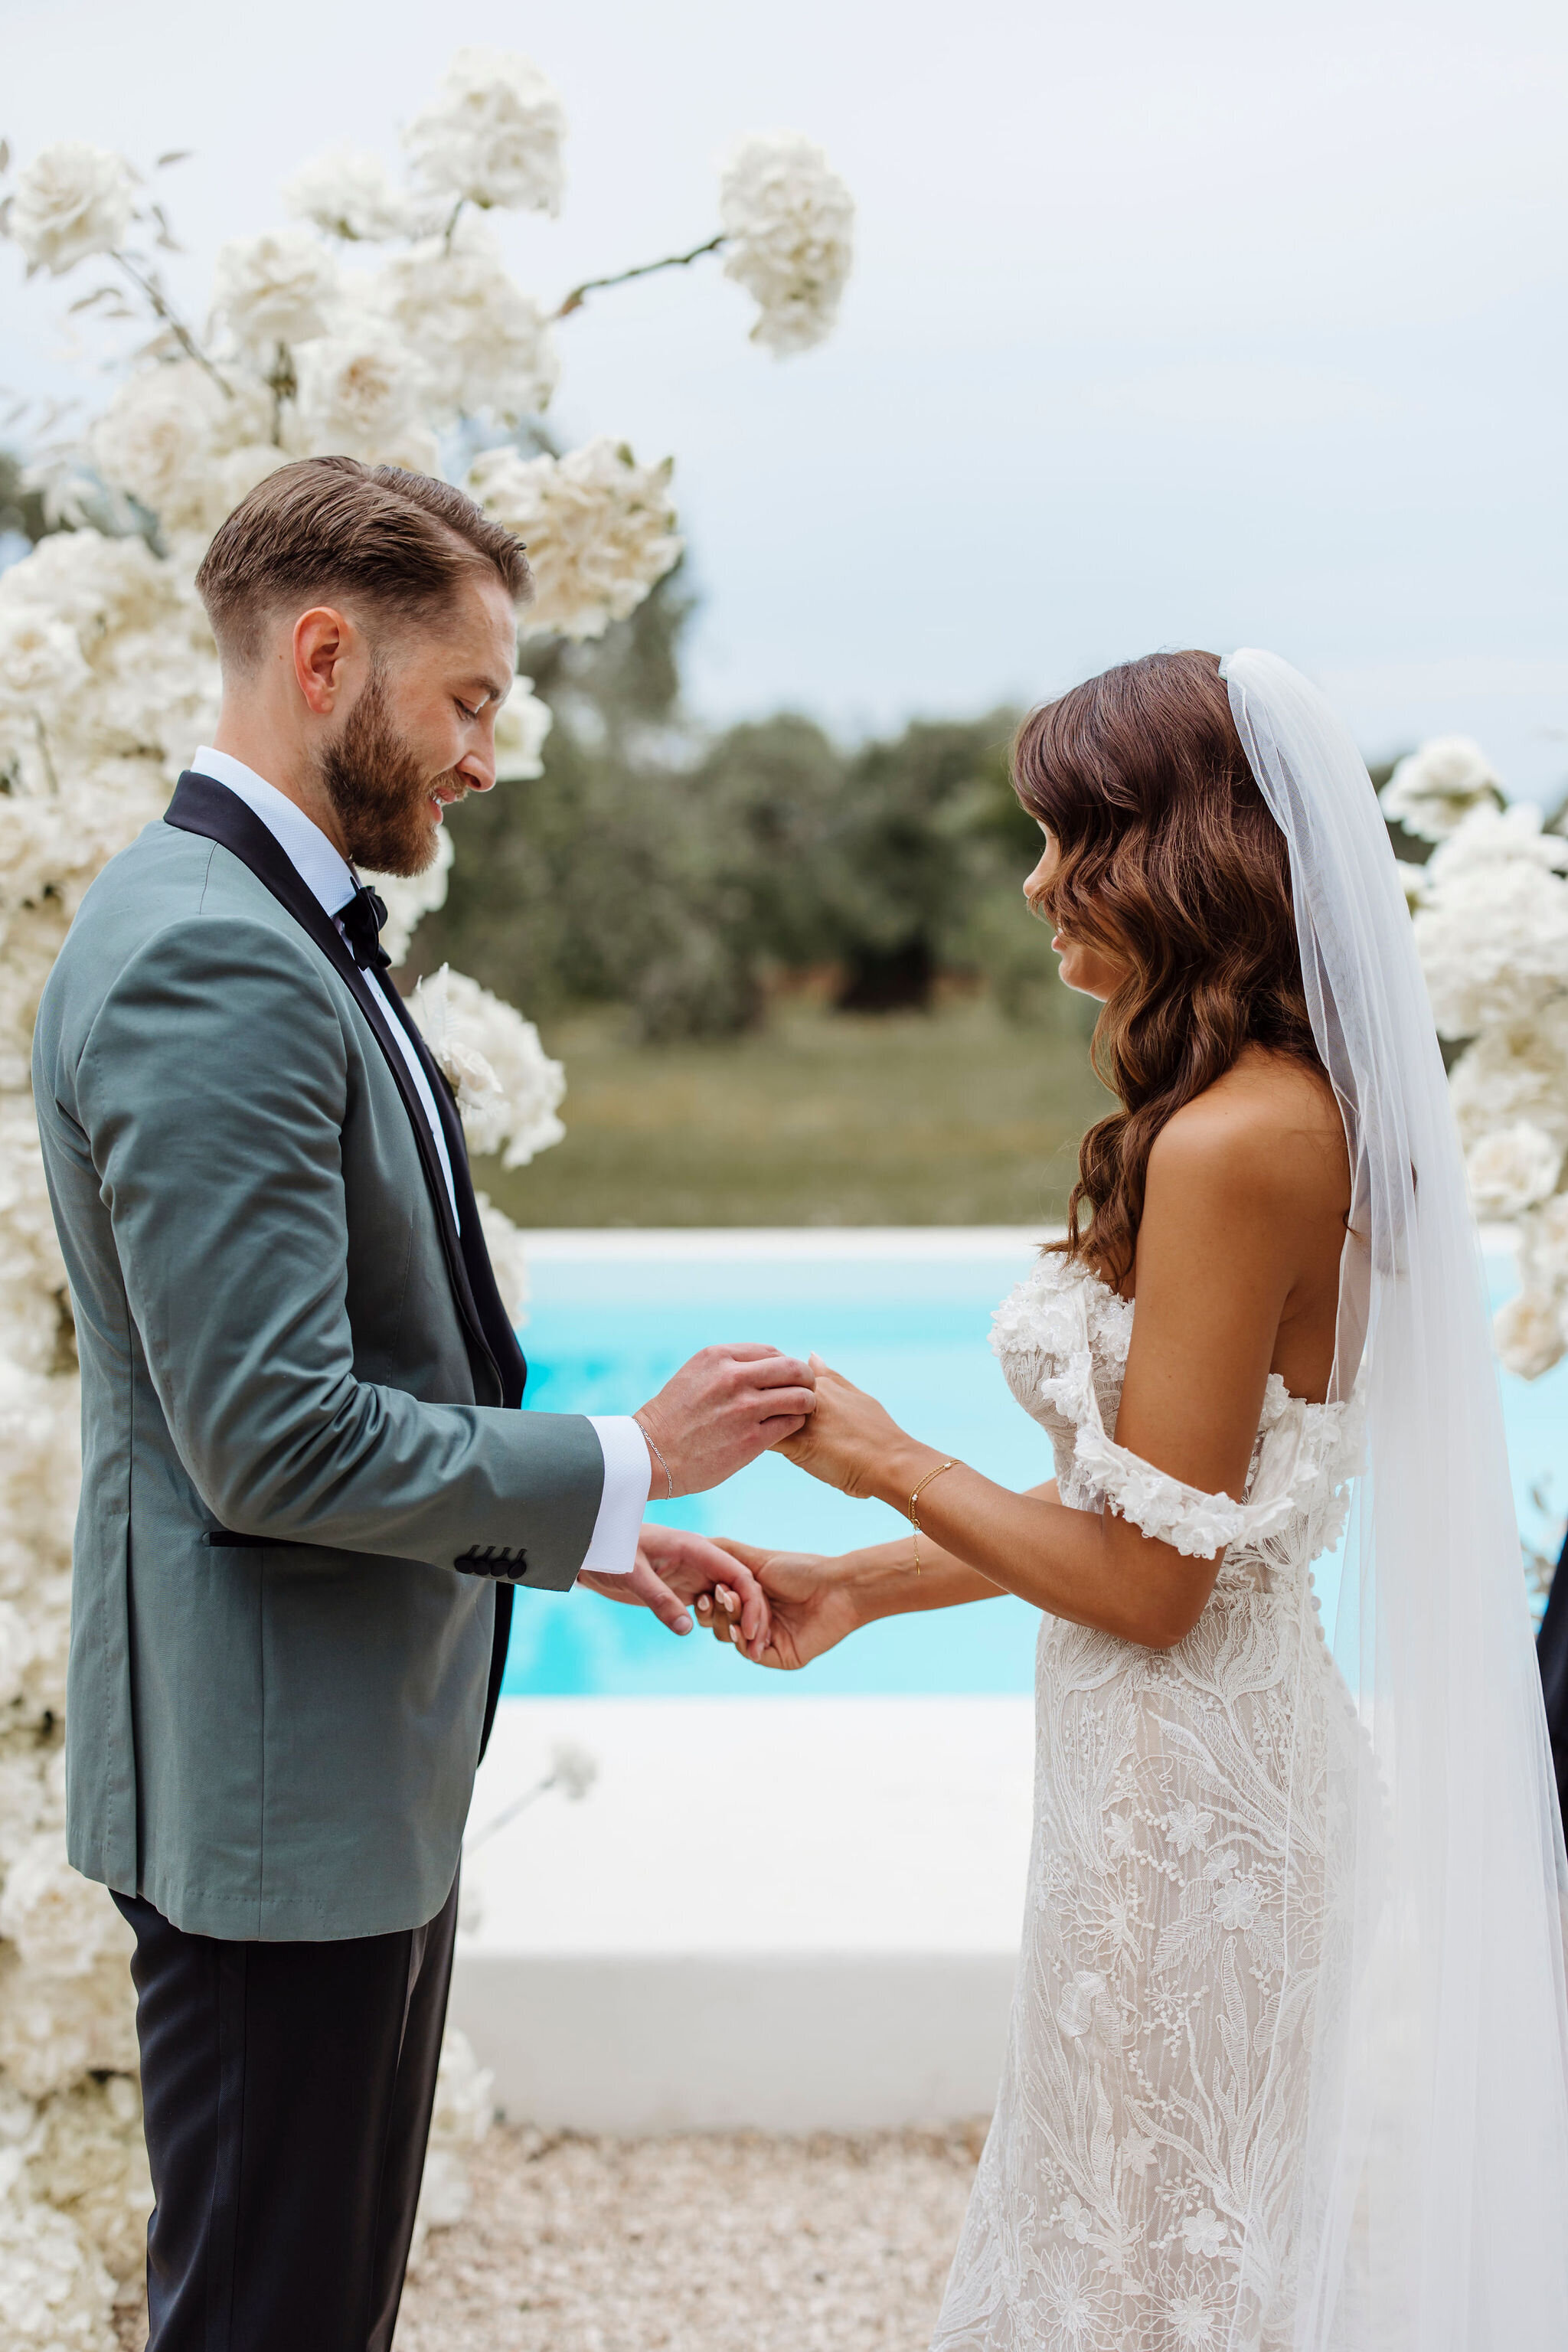 Nicky and Jack standing at the altar as they exchange vows at their wedding ceremony by the pool of Masseria Moroseta, Ostuni